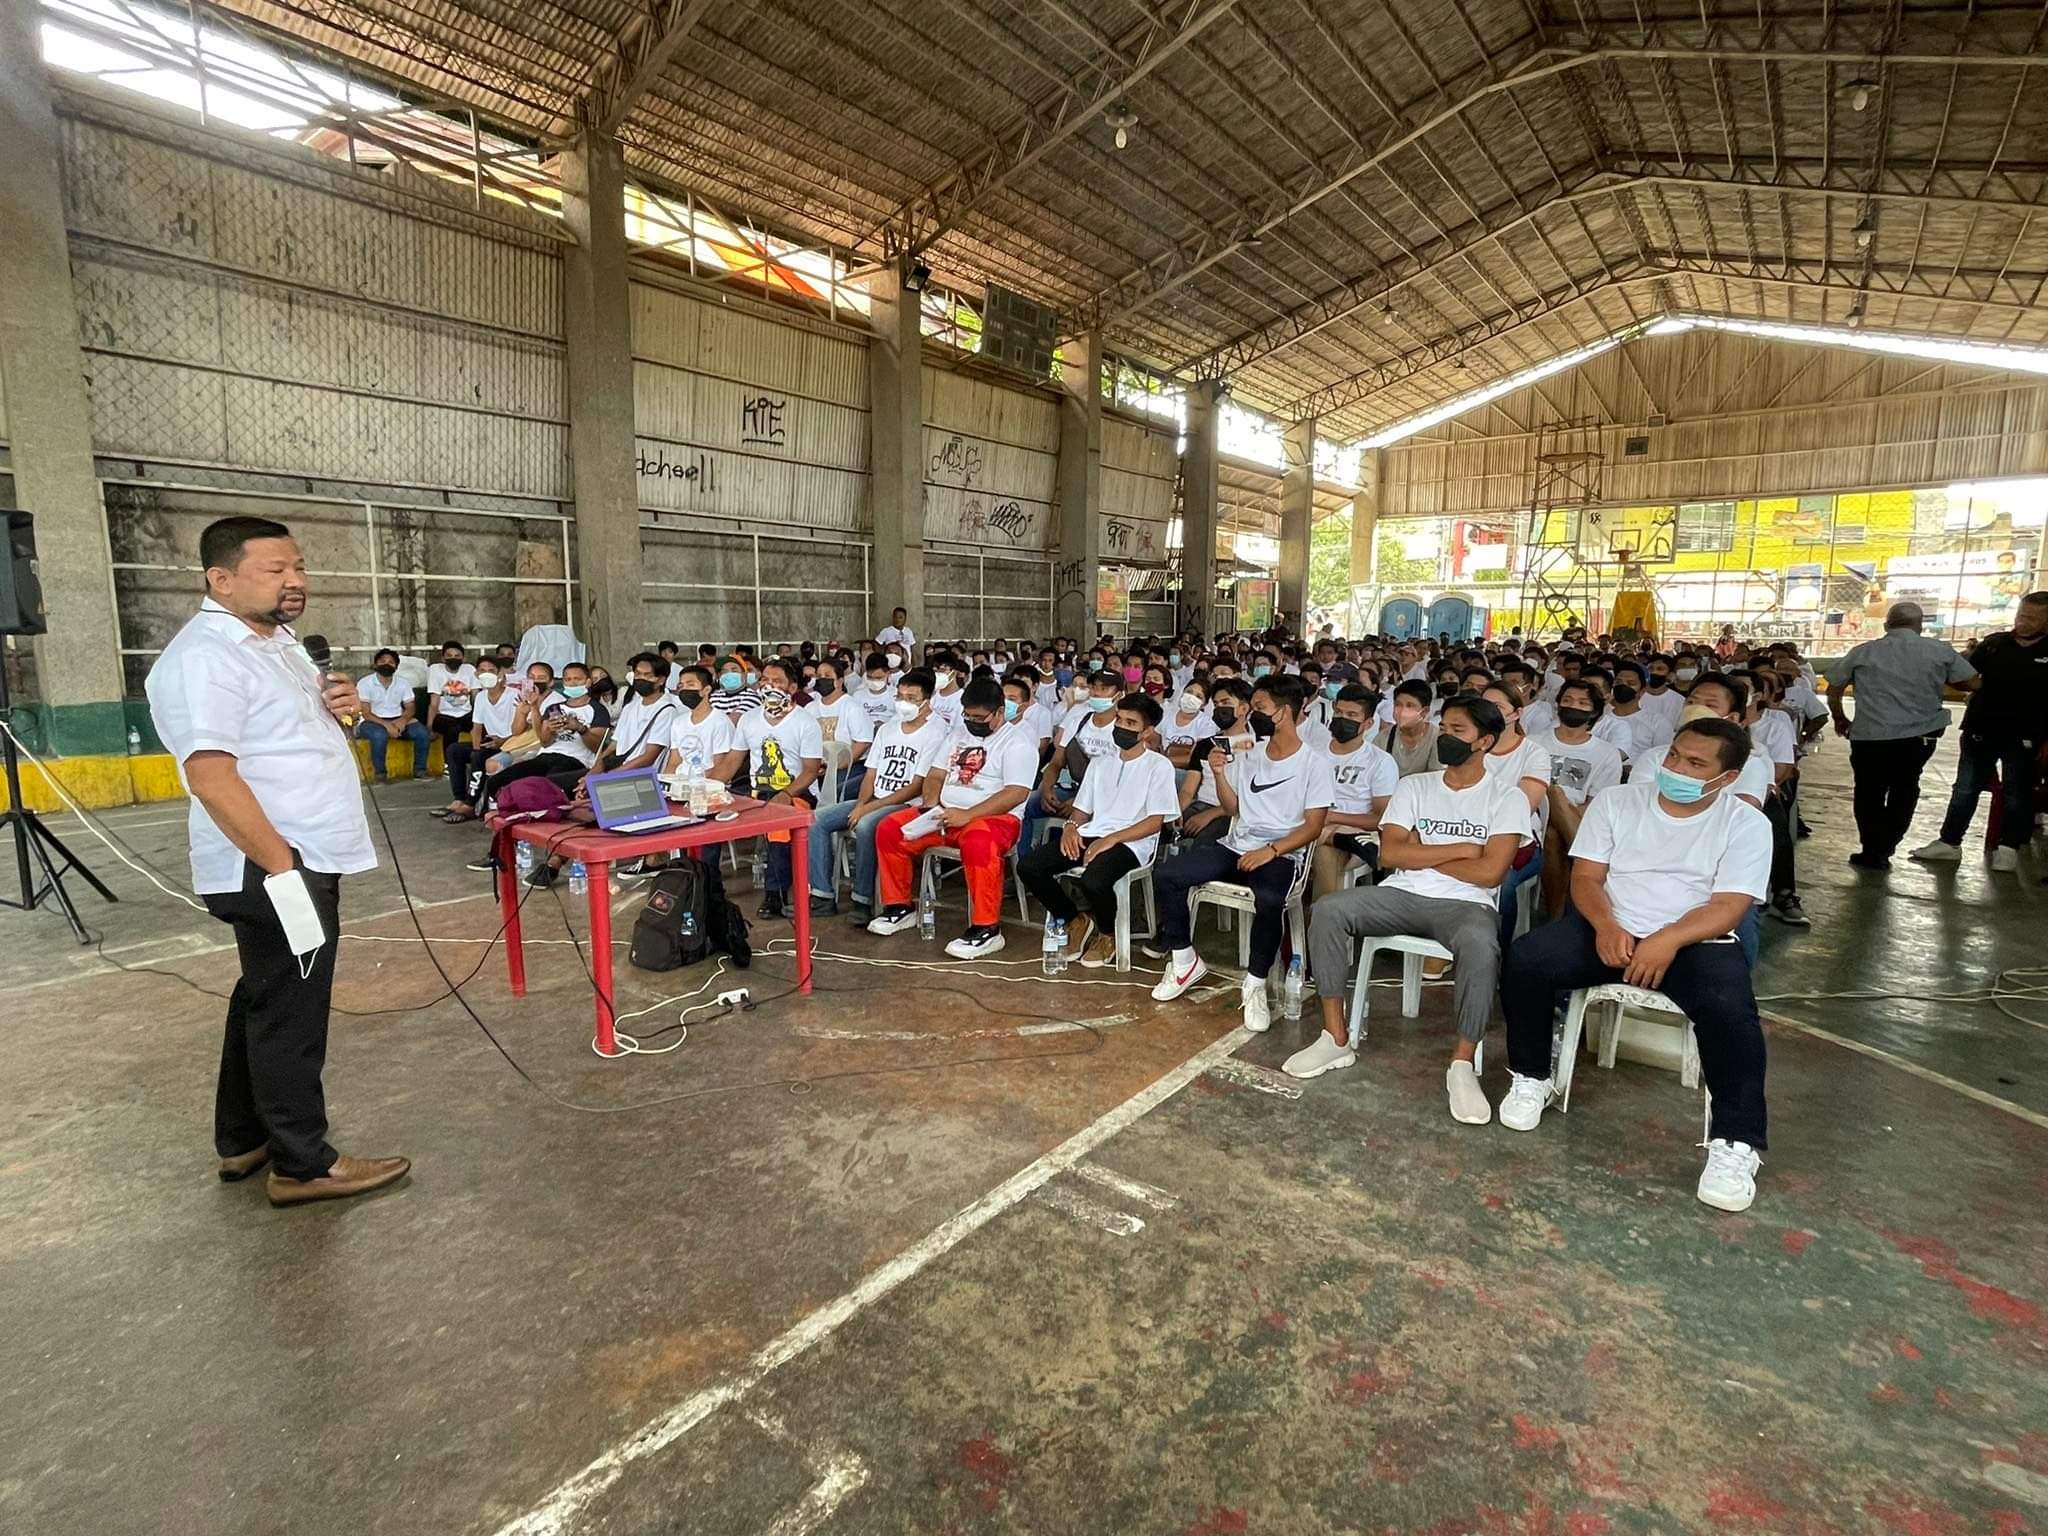 LTO 7 to offer 2,000 TDC scholarships, launch new LTO Licensing Center in Bohol